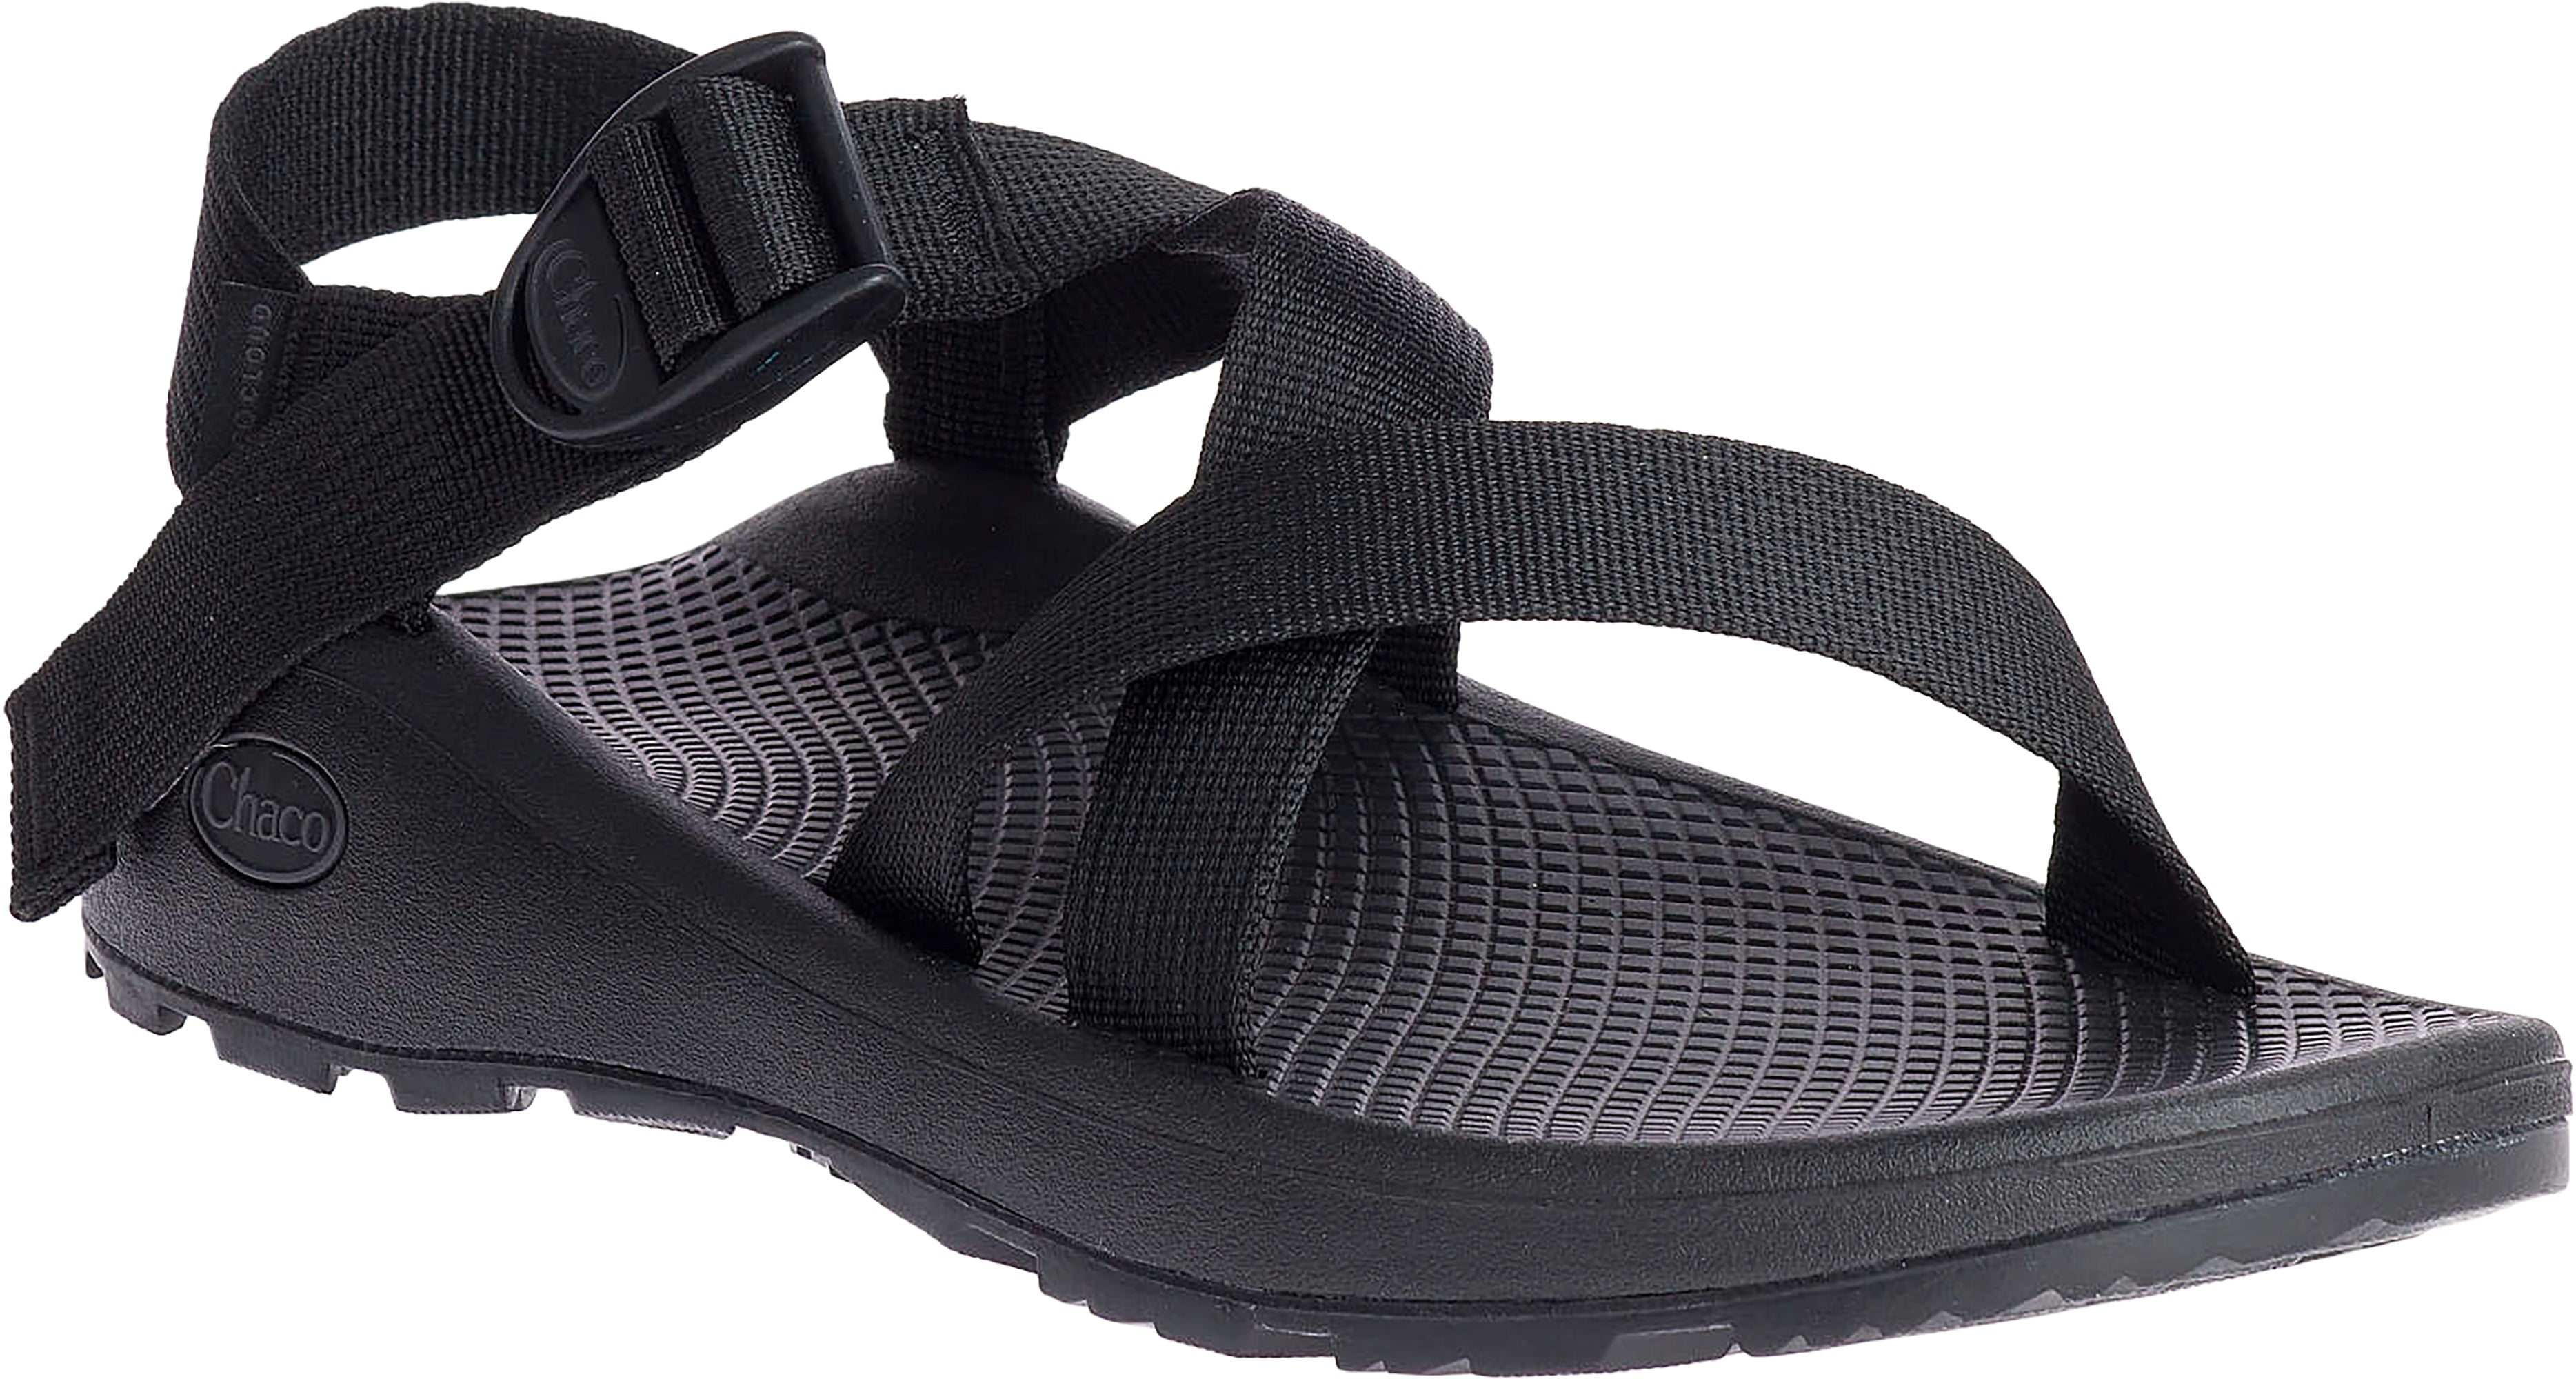 Chaco Classic Flip-Flops (For Women) - Save 20%